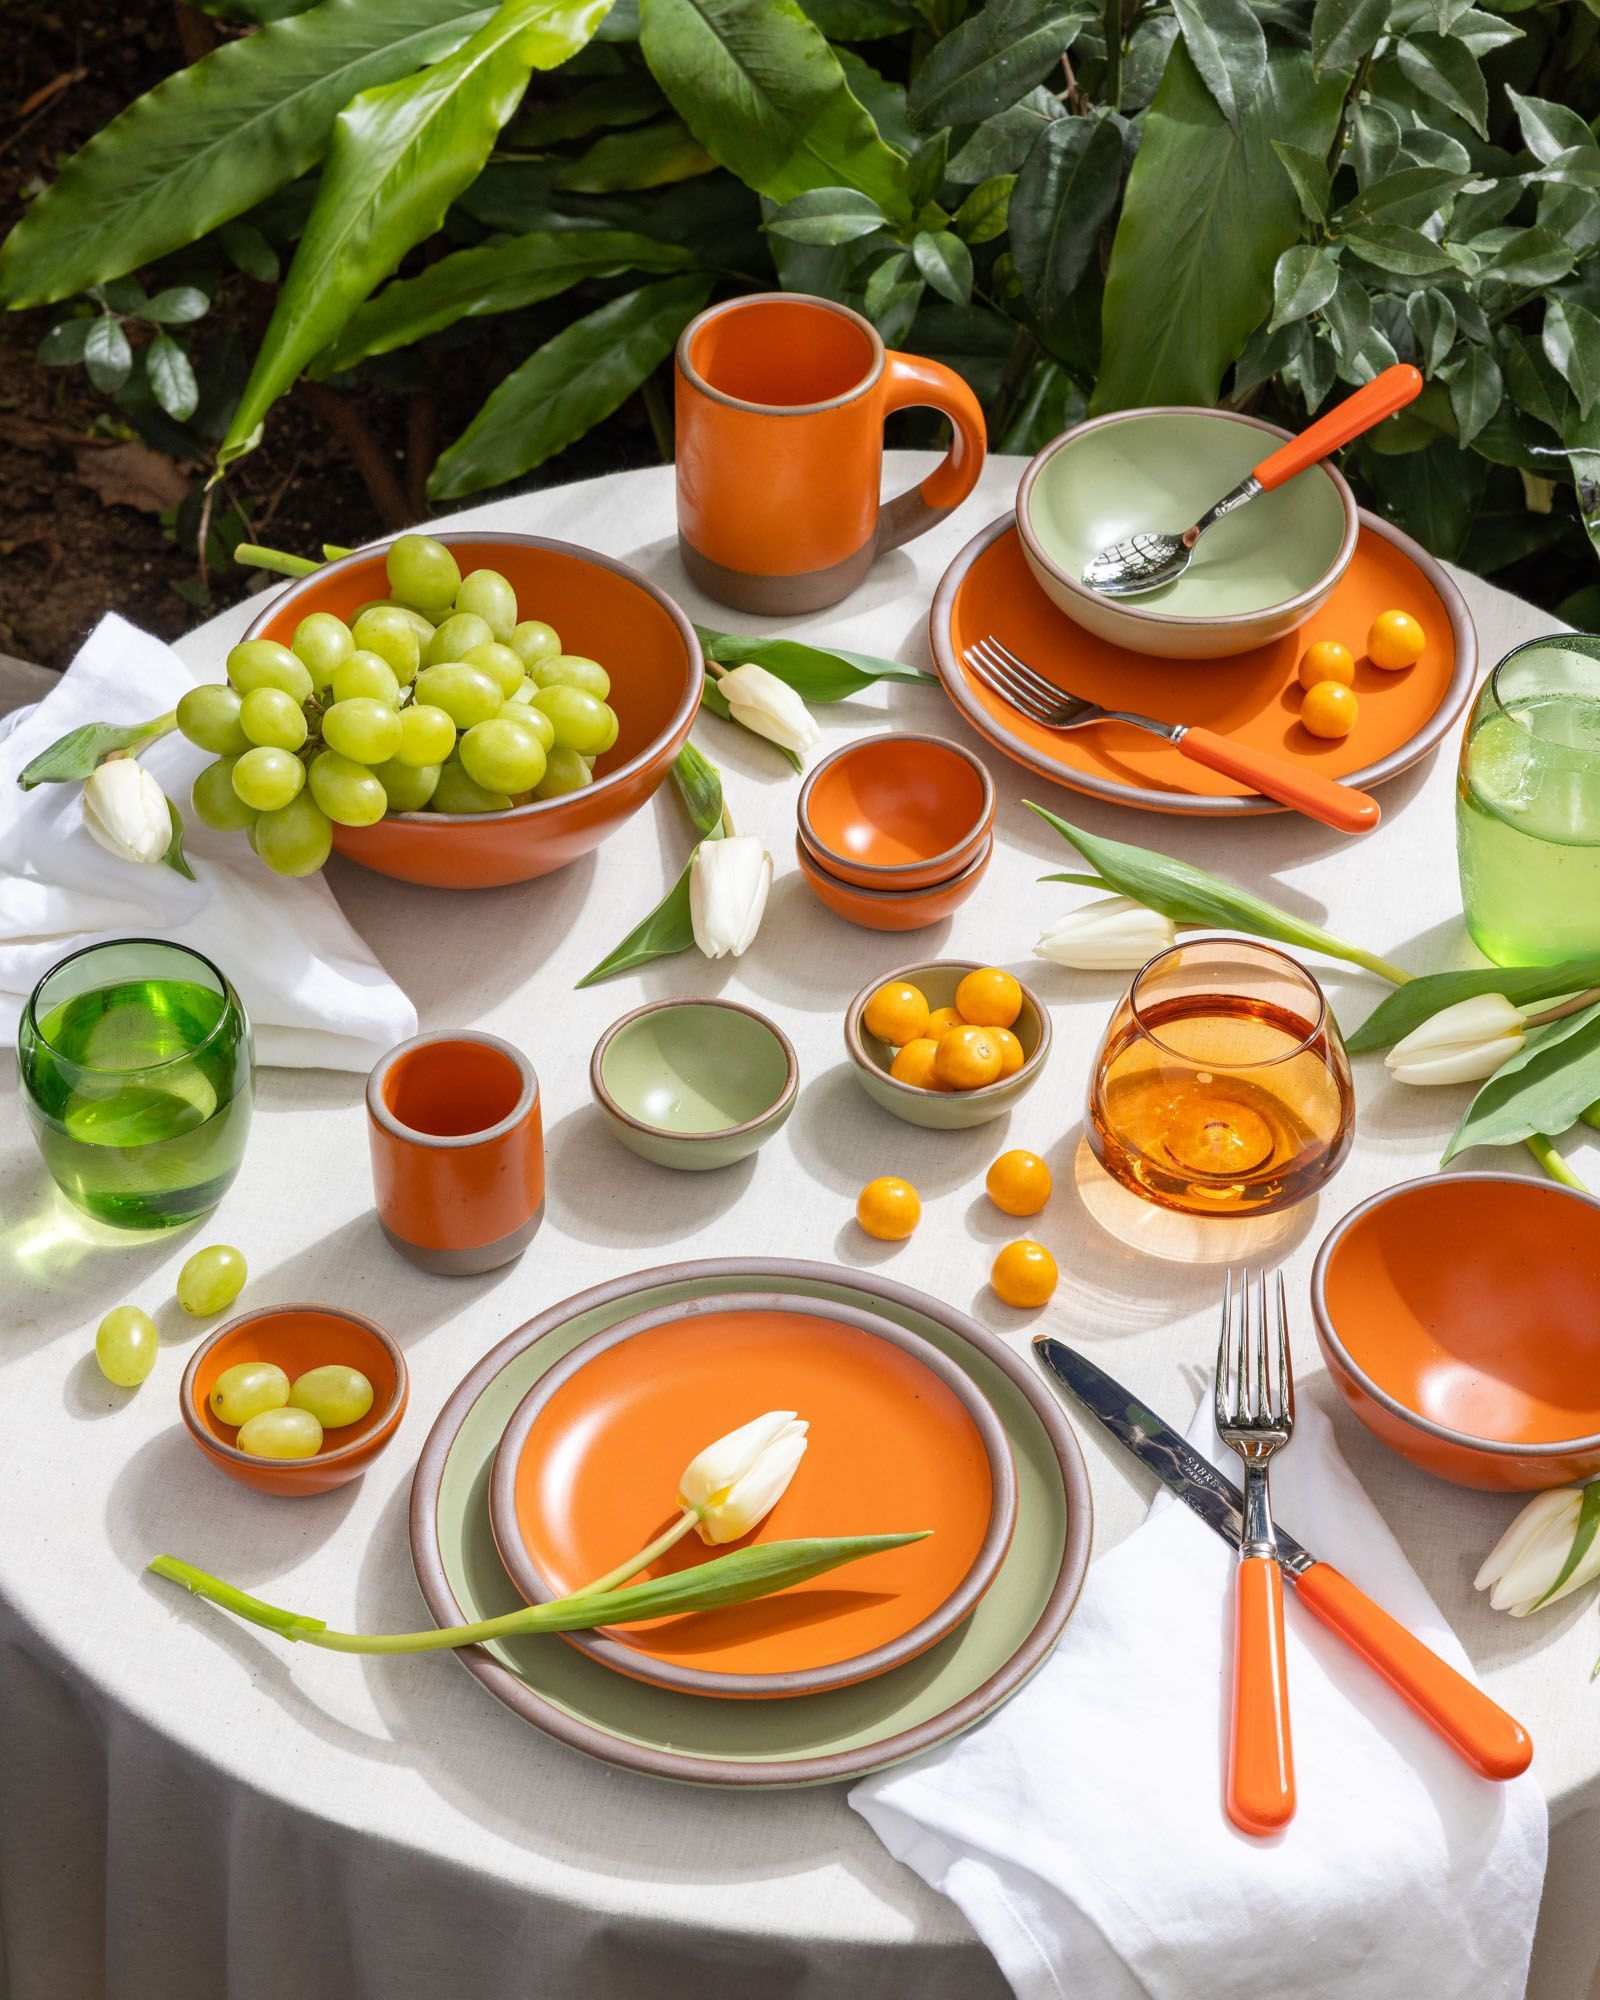 In an outdoor setting, a table is covered in ceramic dinnerware in a bold orange and calming sage green colors, surrounded by glasses, flatware and flowers in the same color palette.